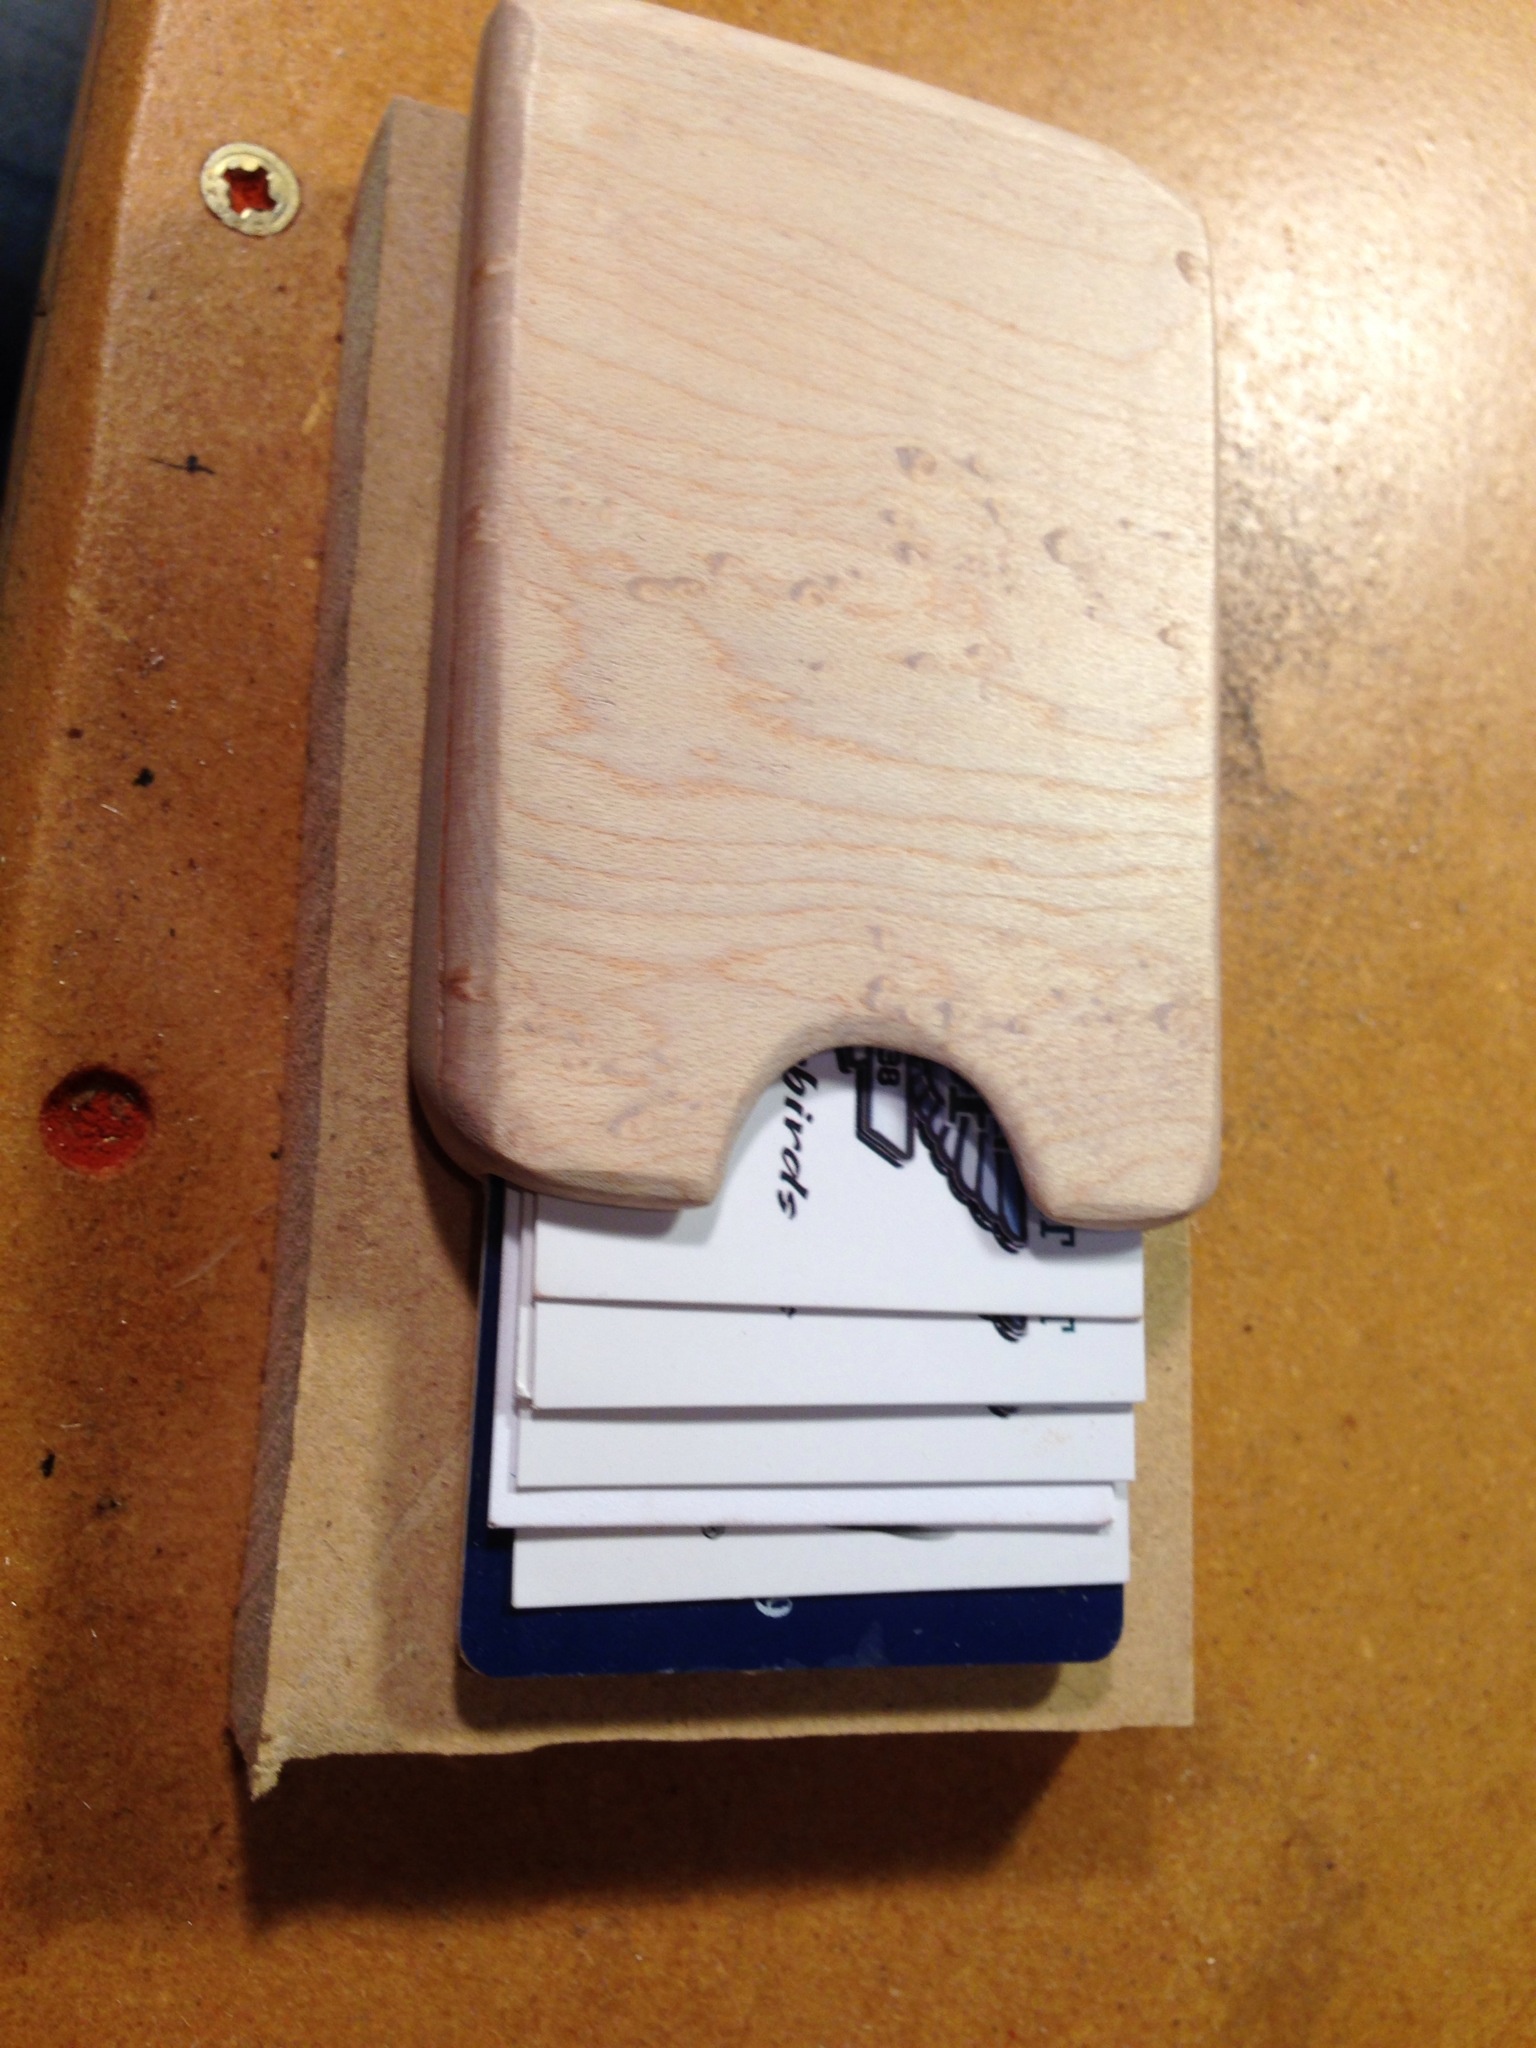 Business card case Woodworking Plan from WOOD Magazine